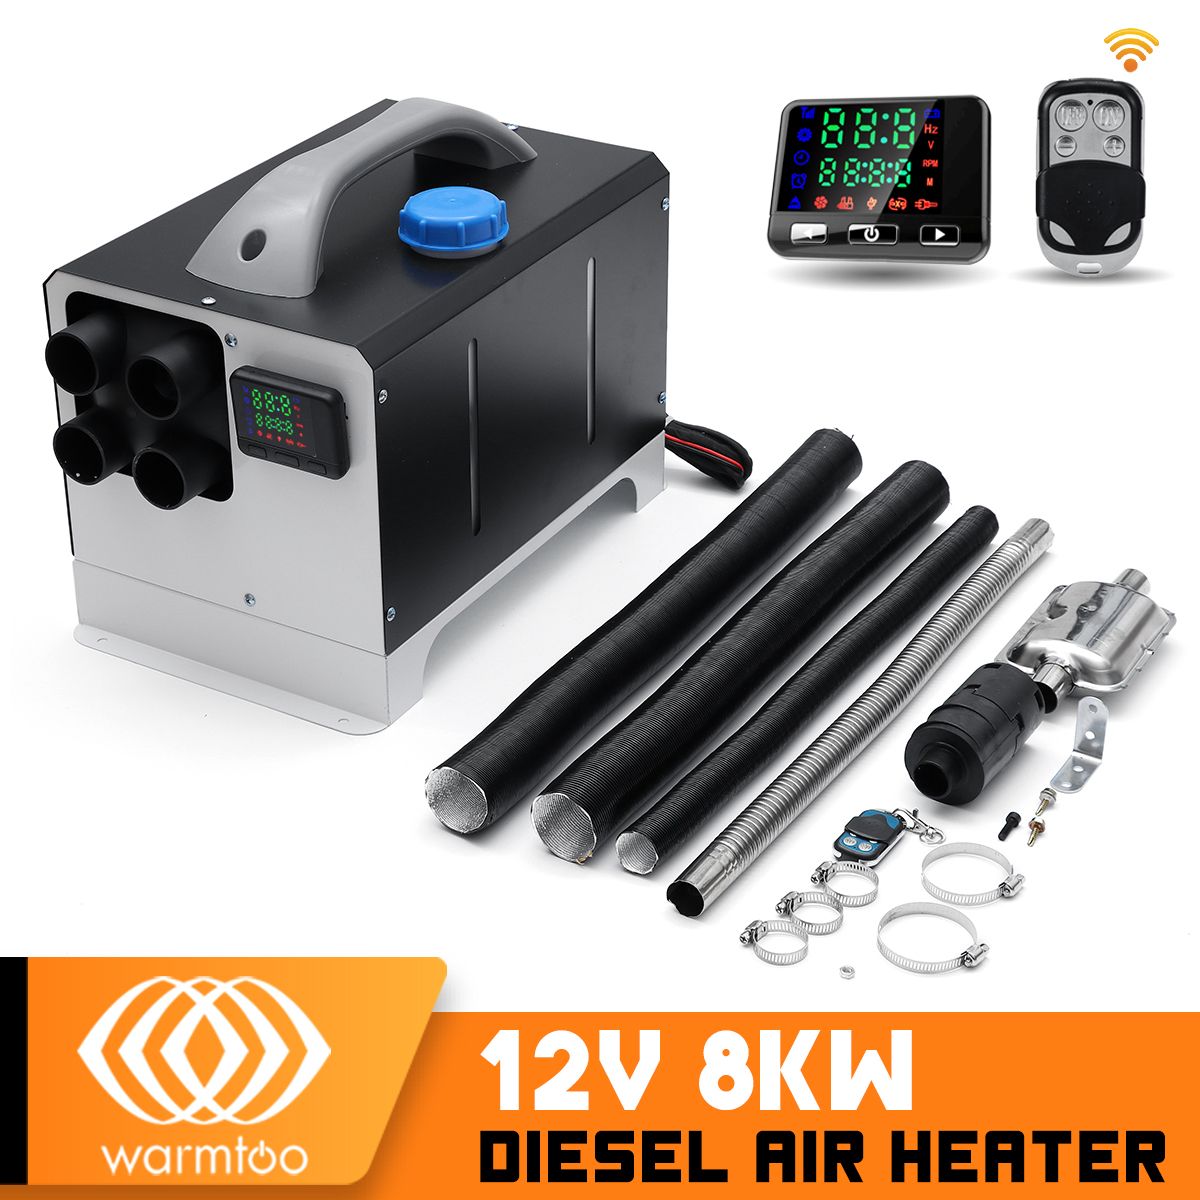 Warmtoo-Car-Parking-Heater-12V-8KW-LCD-Display-Diesel-Air-Heater-Big-Handle-All-In-One-Remote-Contro-1723792